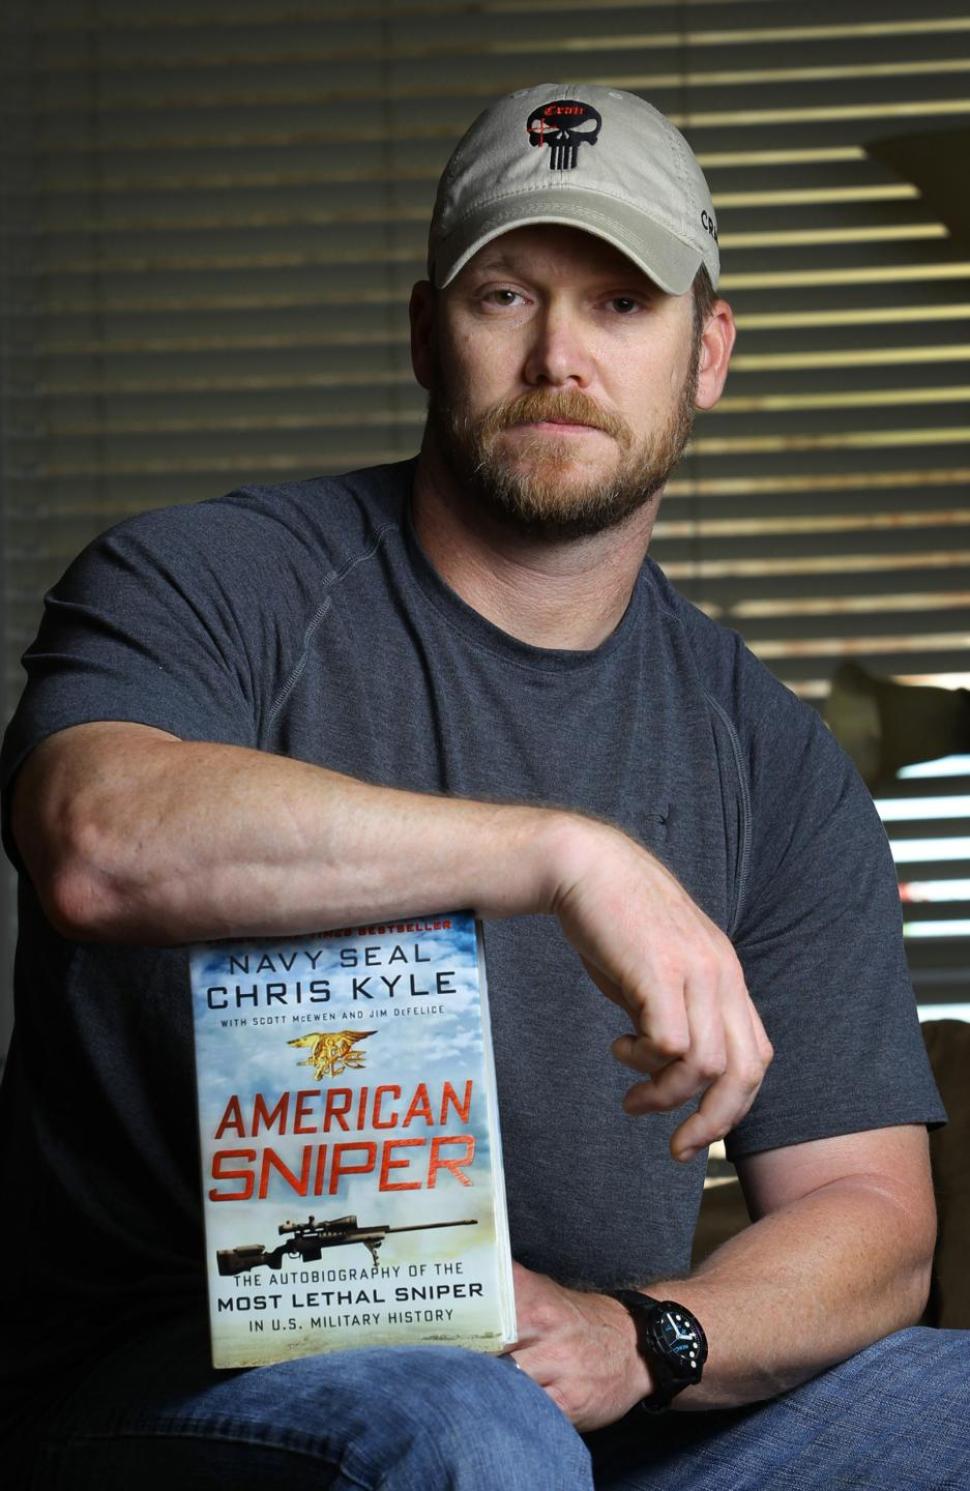 Jim DeFelice told the Daily News that former Navy SEAL Chris Kyle would be 'laughing off' criticism of the movie based on his life and time in Iraq and afterward.